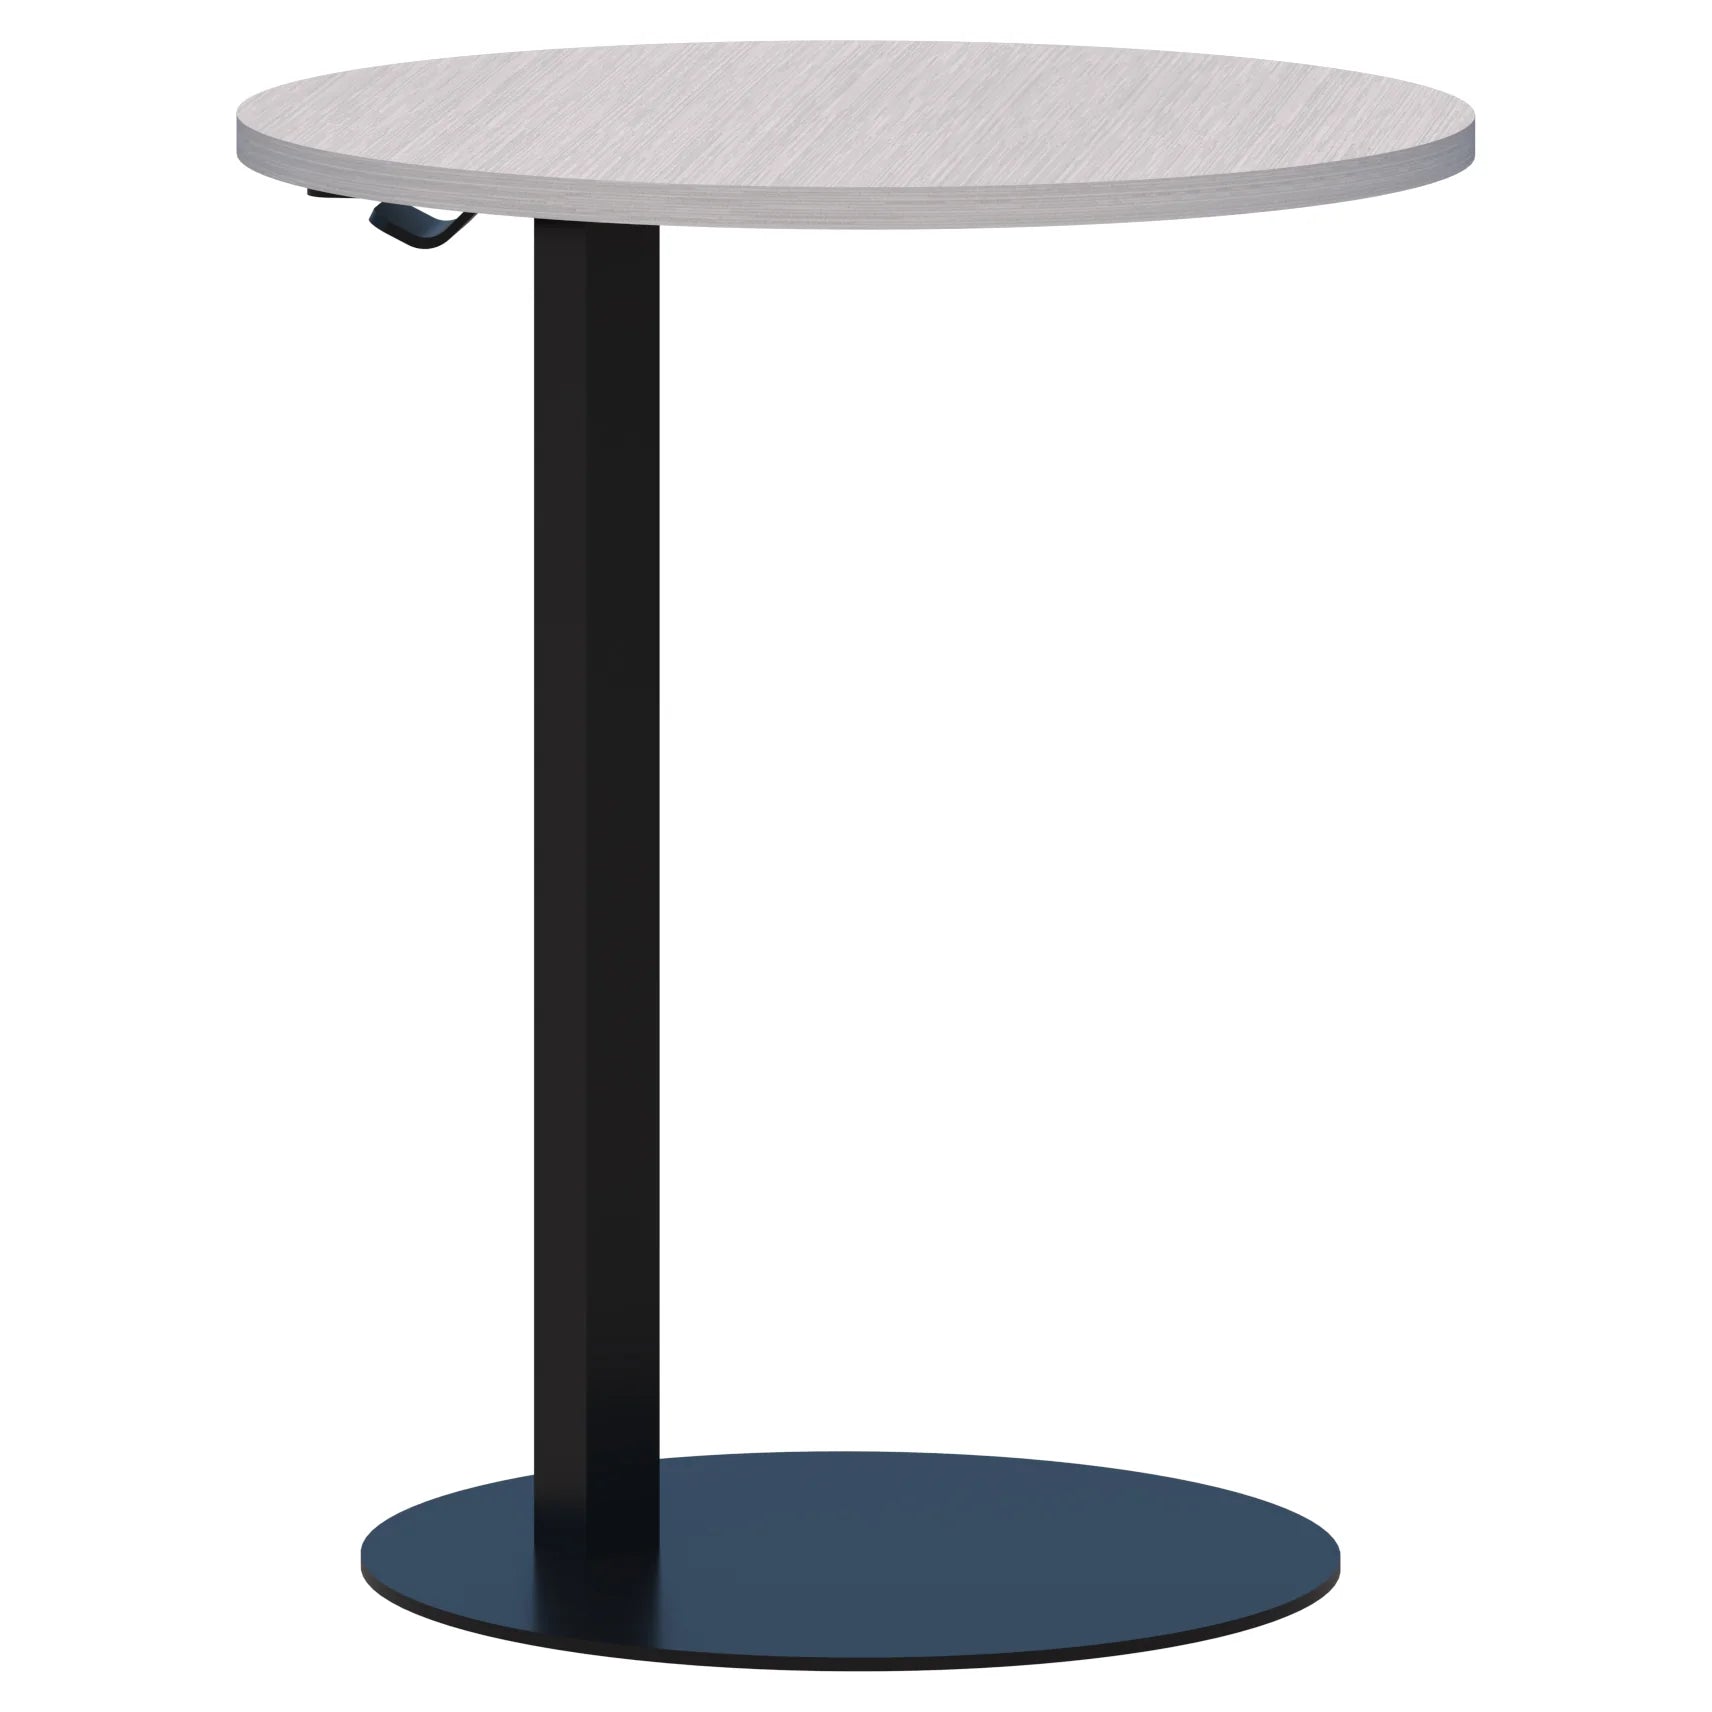 Memo laptop table with round top in silver strata and black pedestal base.